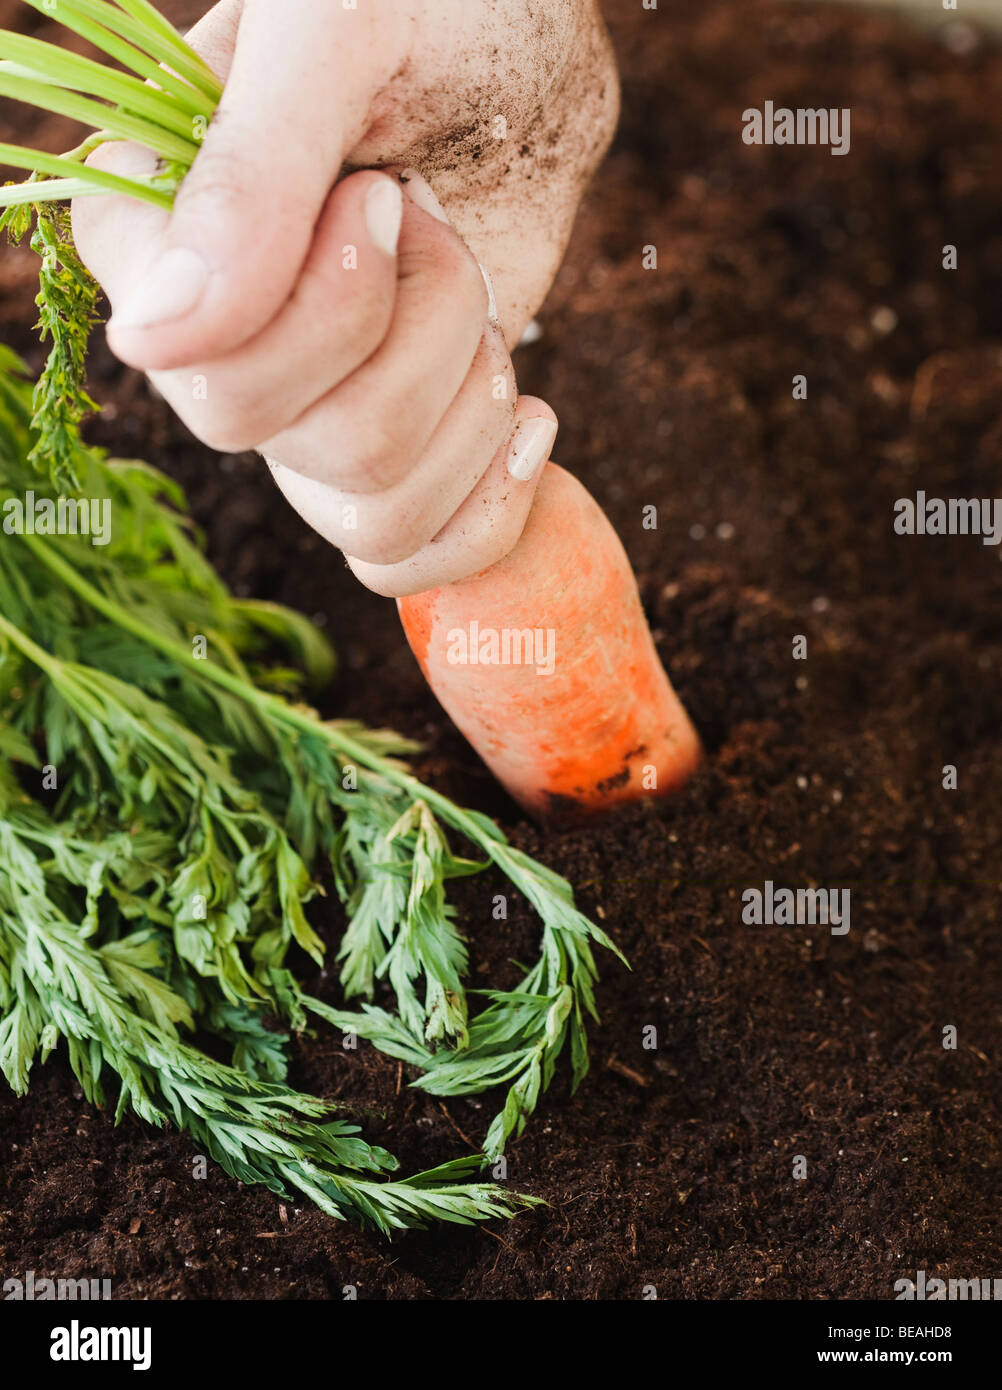 Woman pulling carrot from soil Stock Photo